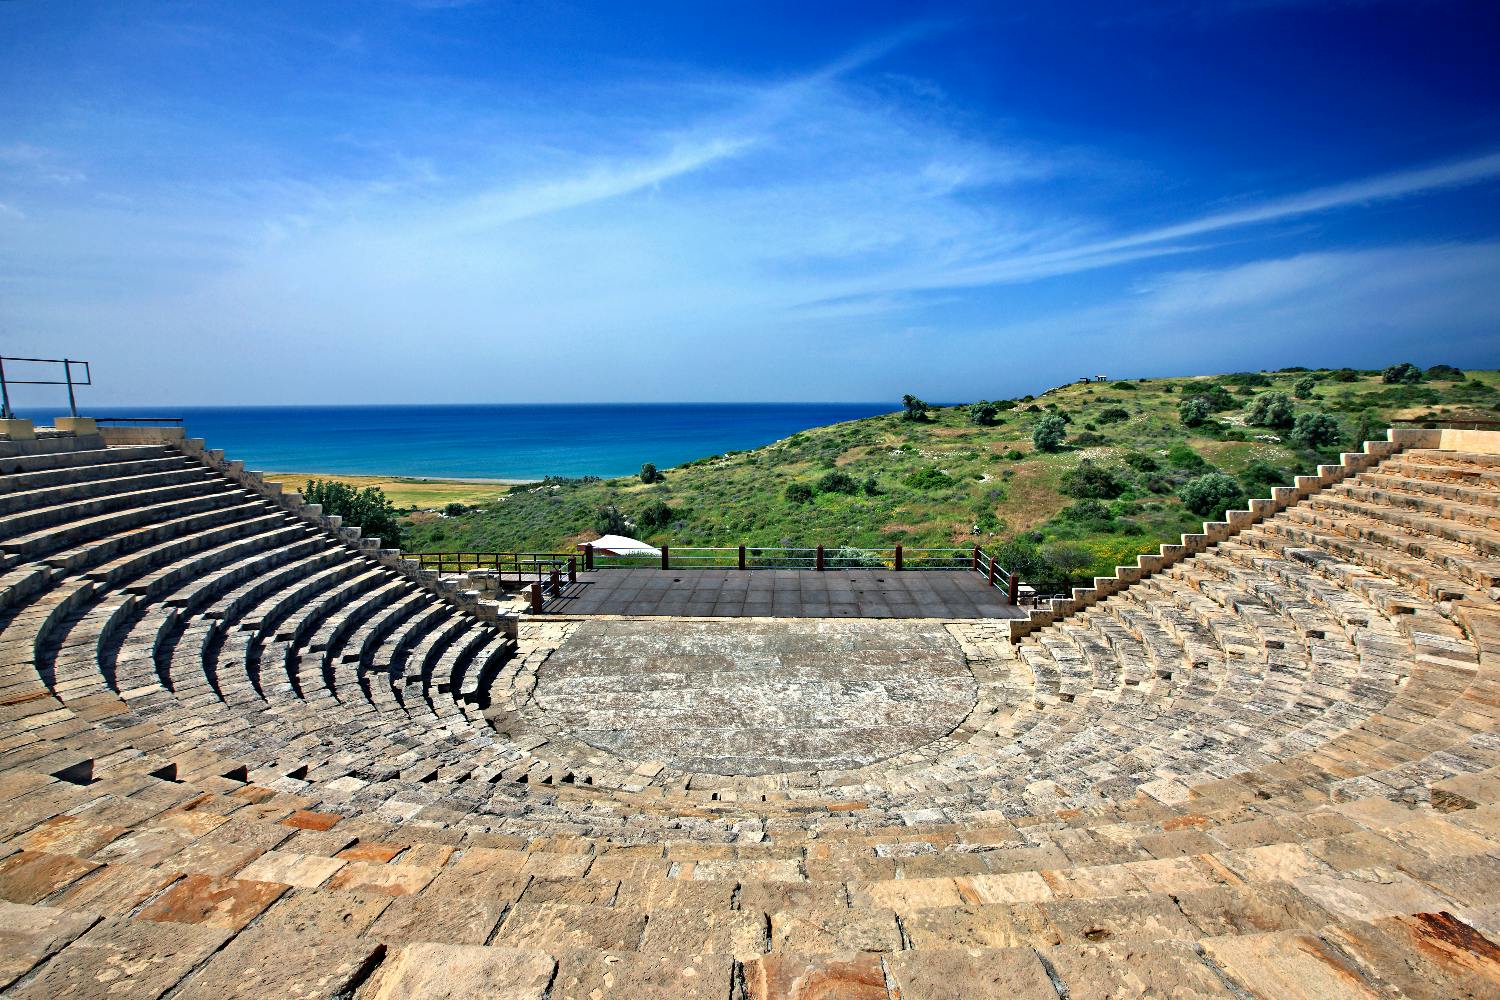 Kourion archaeological heritage site self guided tour in Cyprus